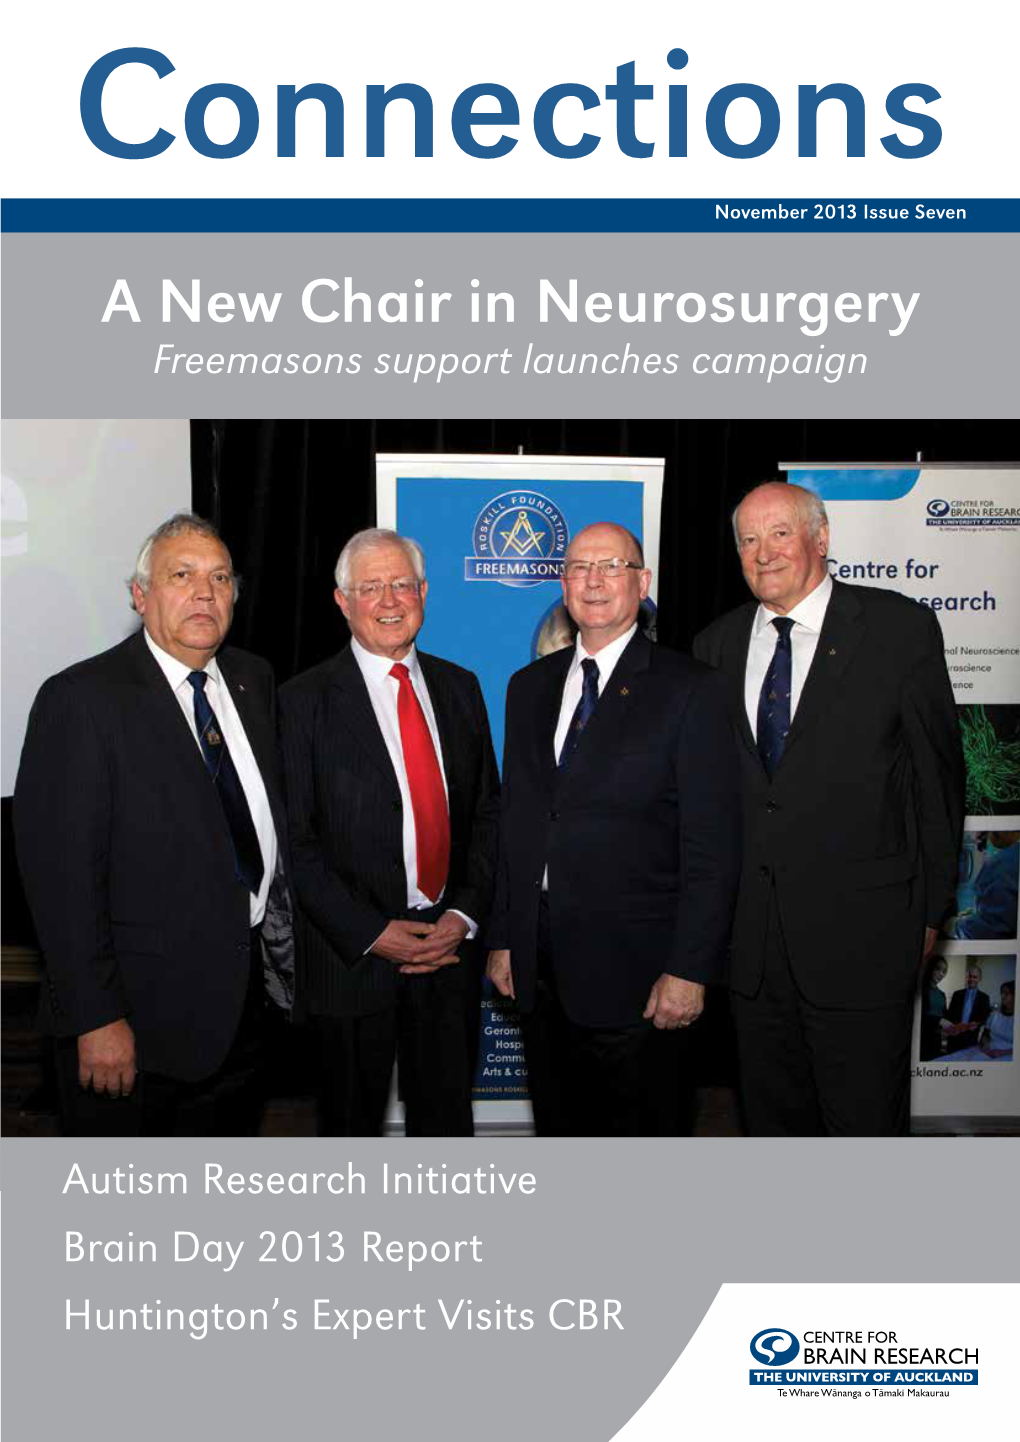 A New Chair in Neurosurgery Freemasons Support Launches Campaign